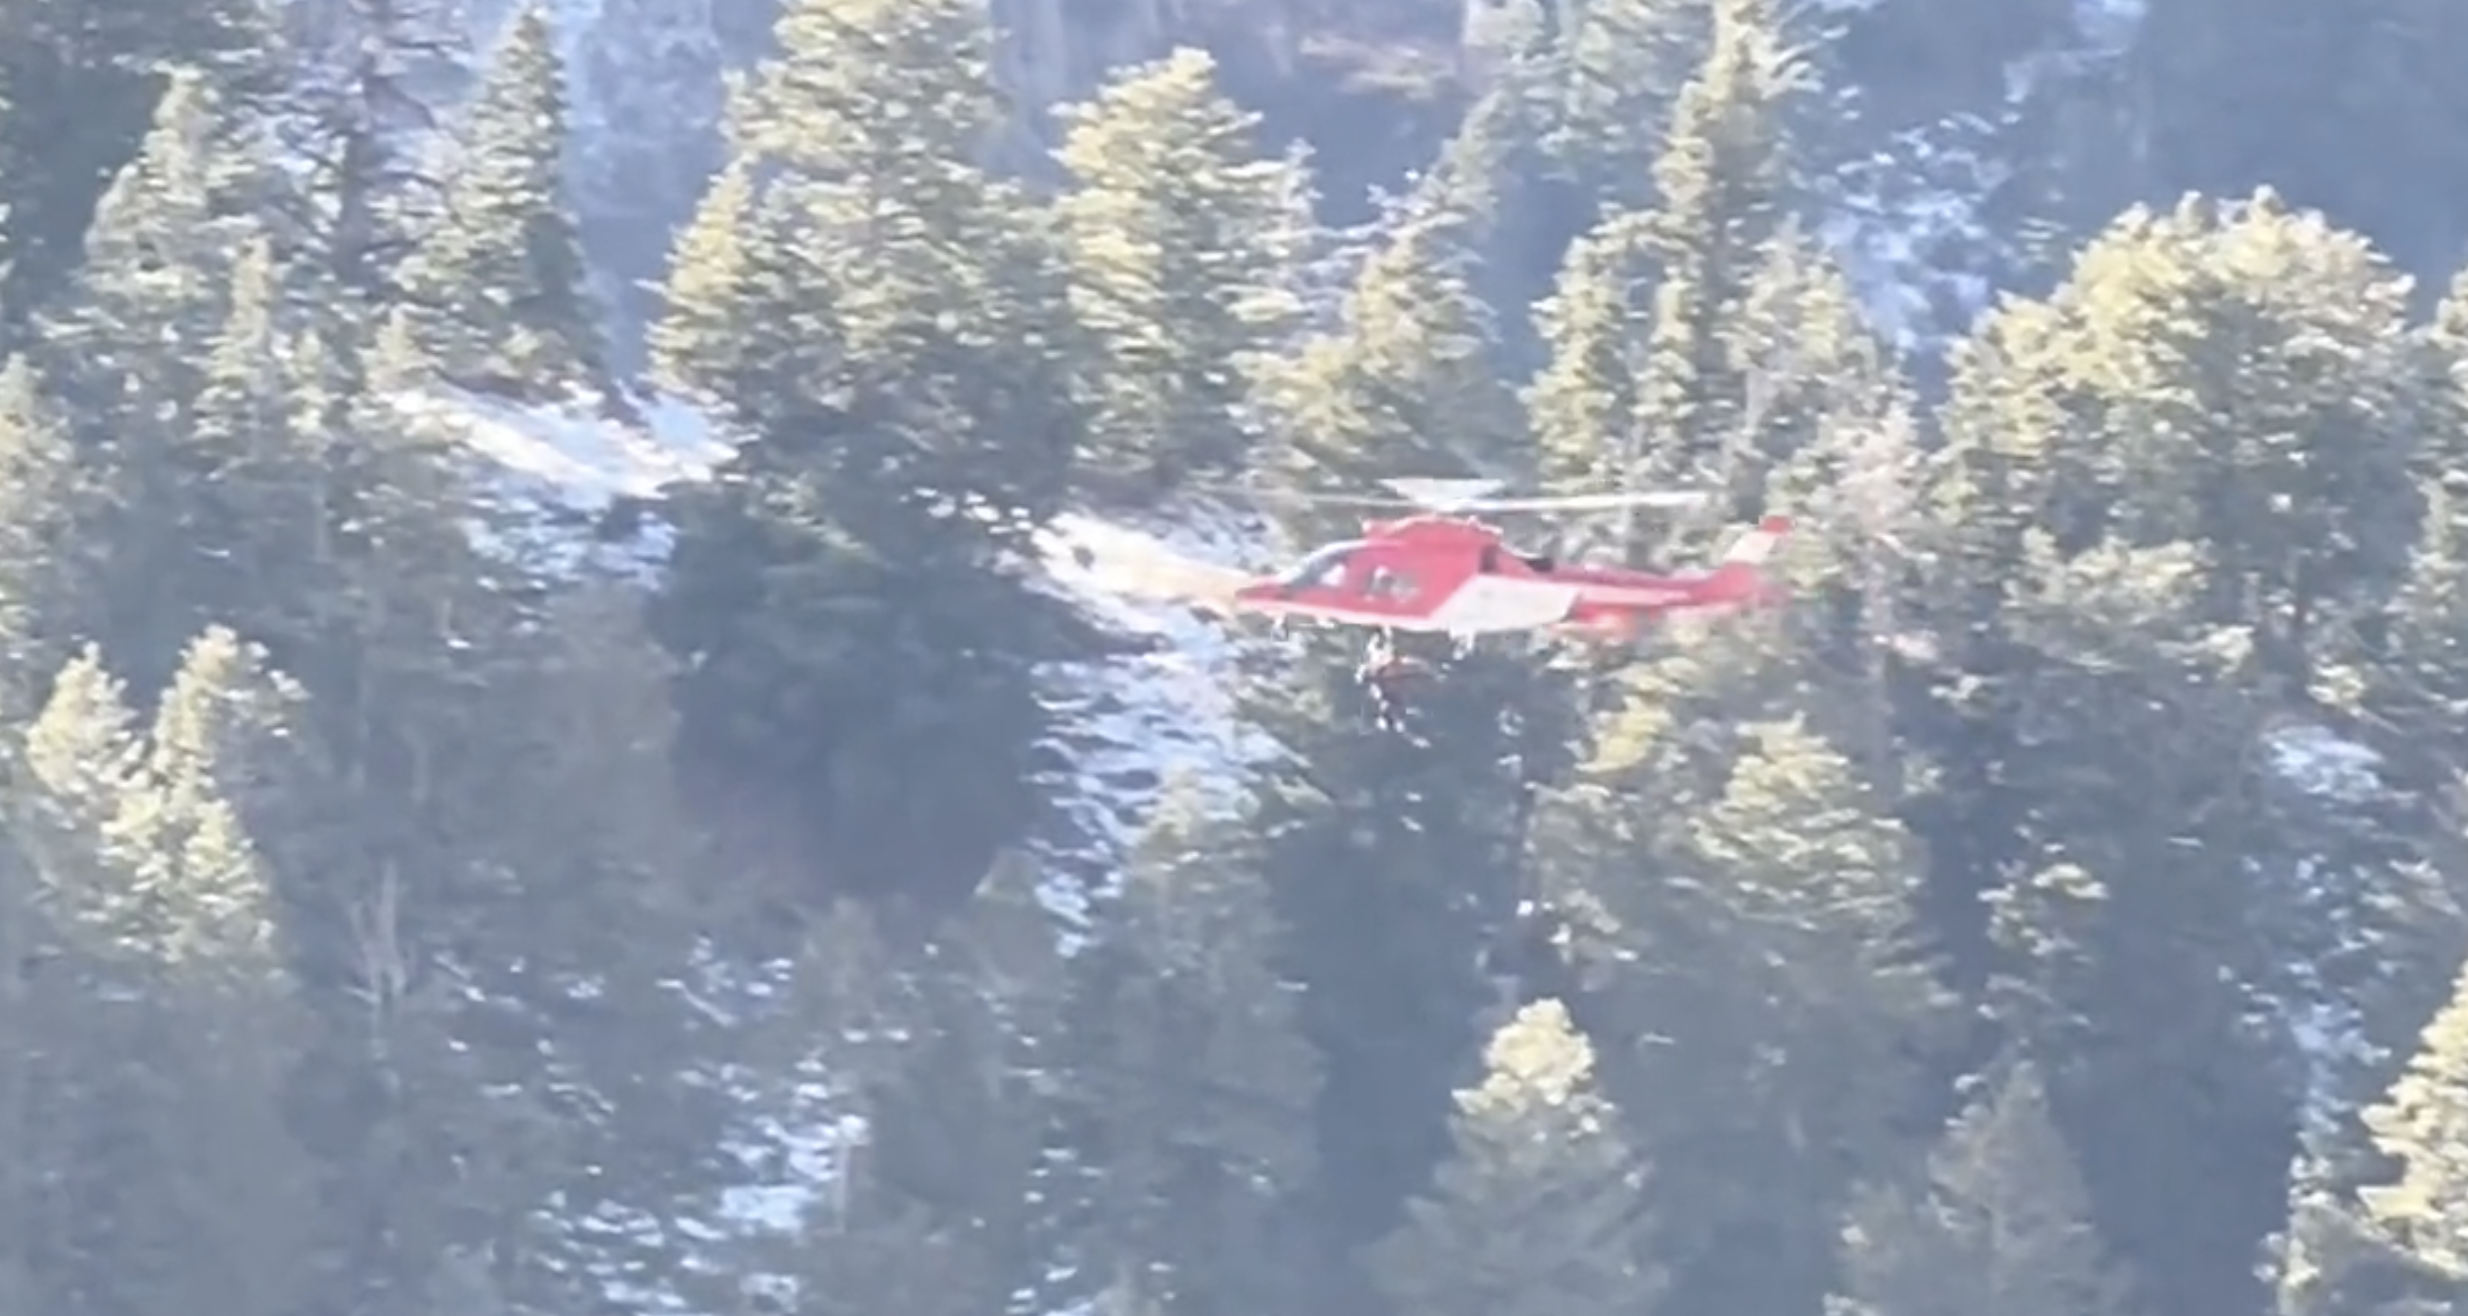 A LifeFlight helicopter removed the lone survivor of a plane crash near Kyhv Peak on Tuesday. (Scre...